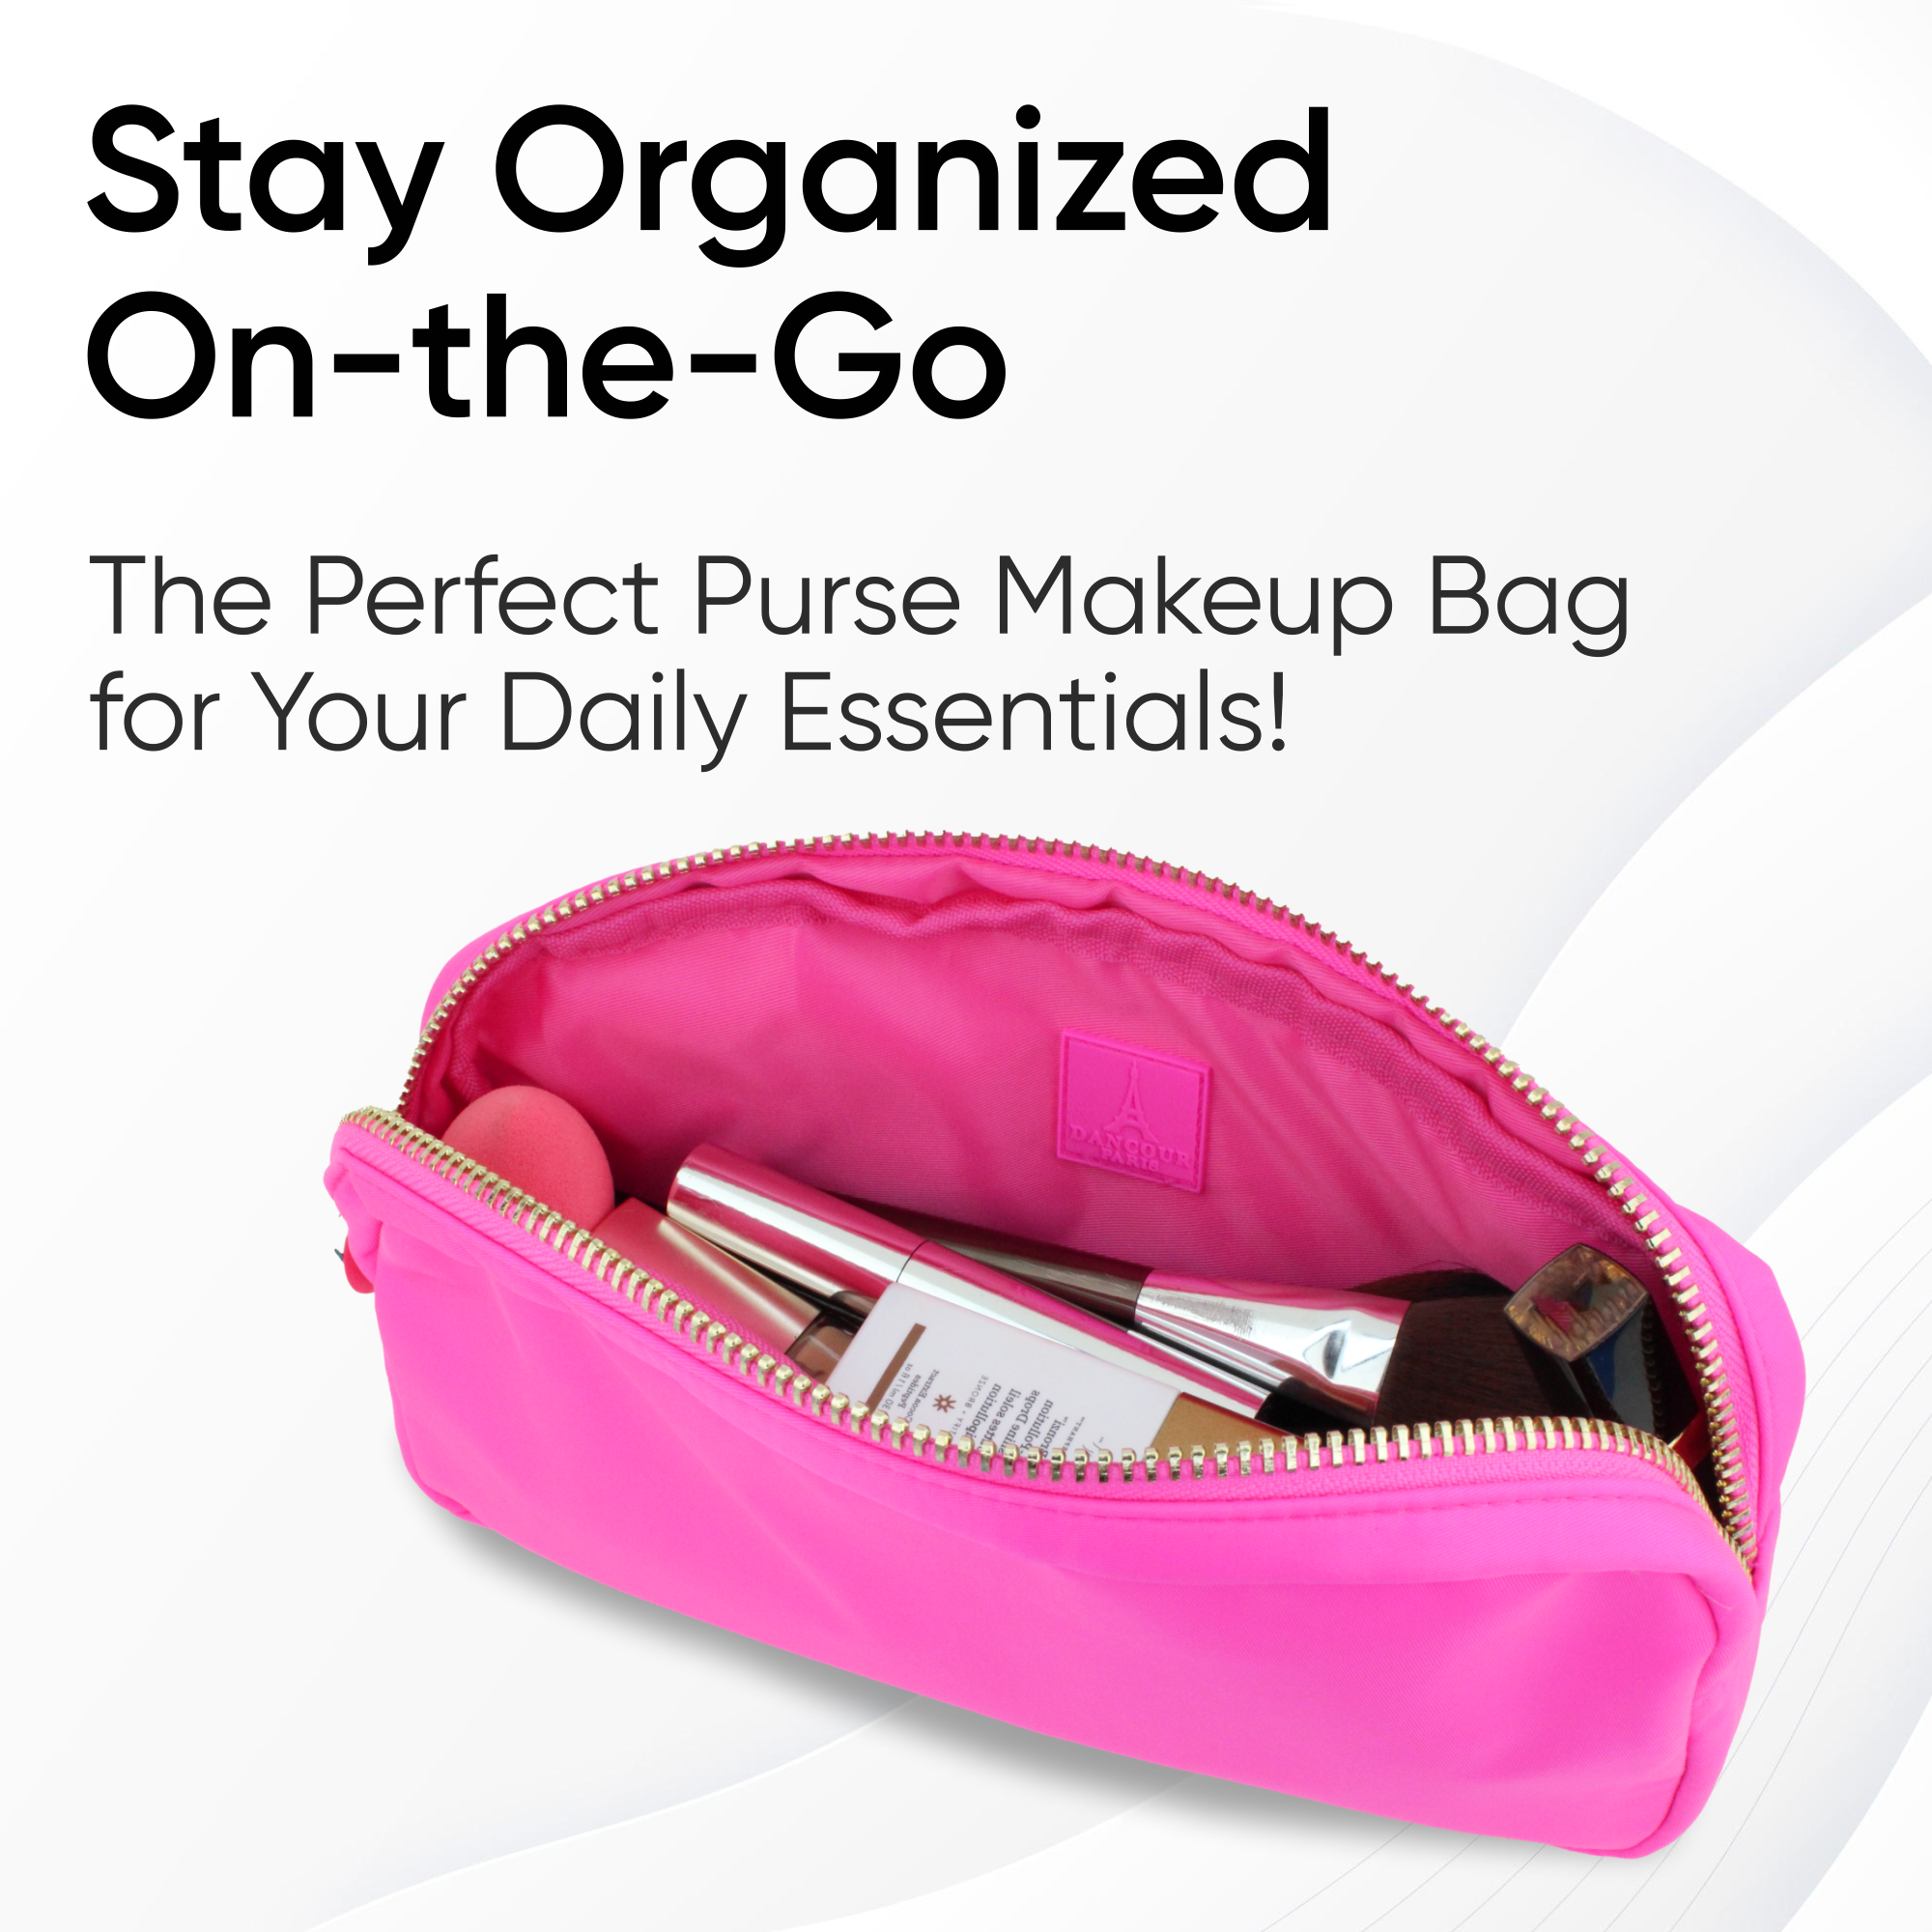 12 Best Small Makeup Bags for Your Purse